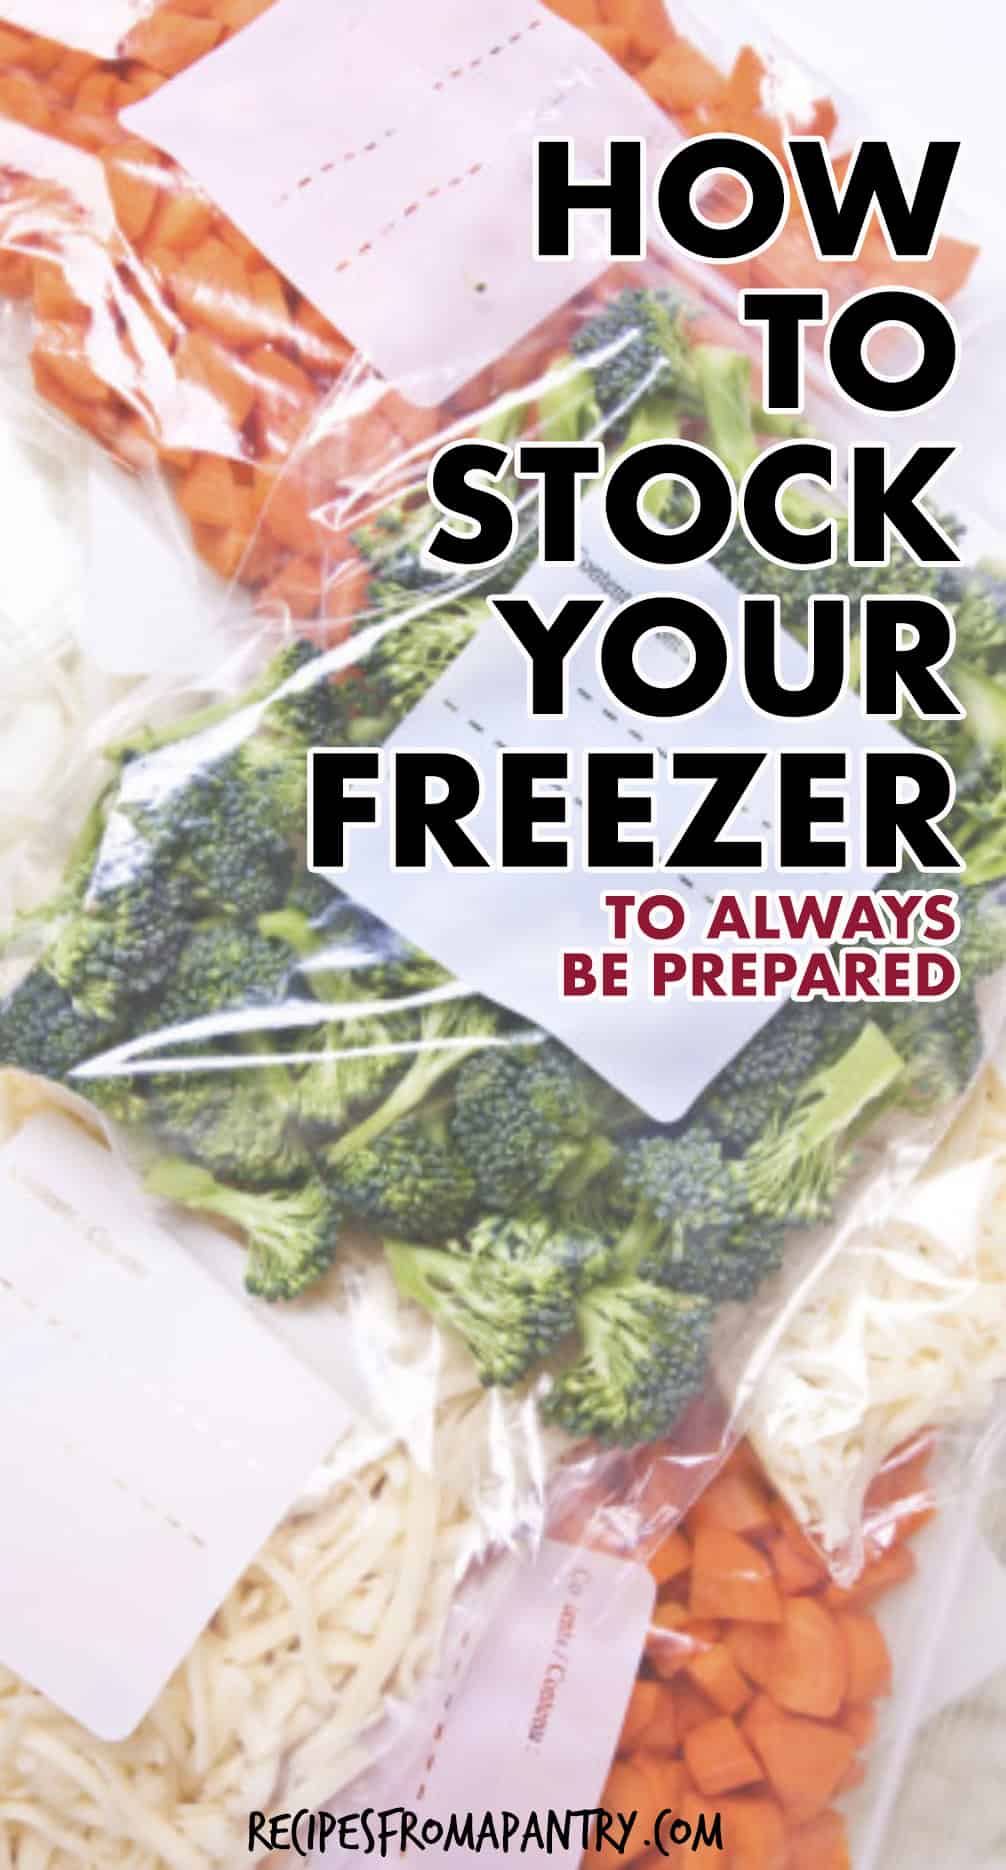 How To Stock Your Freezer To Cook Anything - Recipes From A Pantry